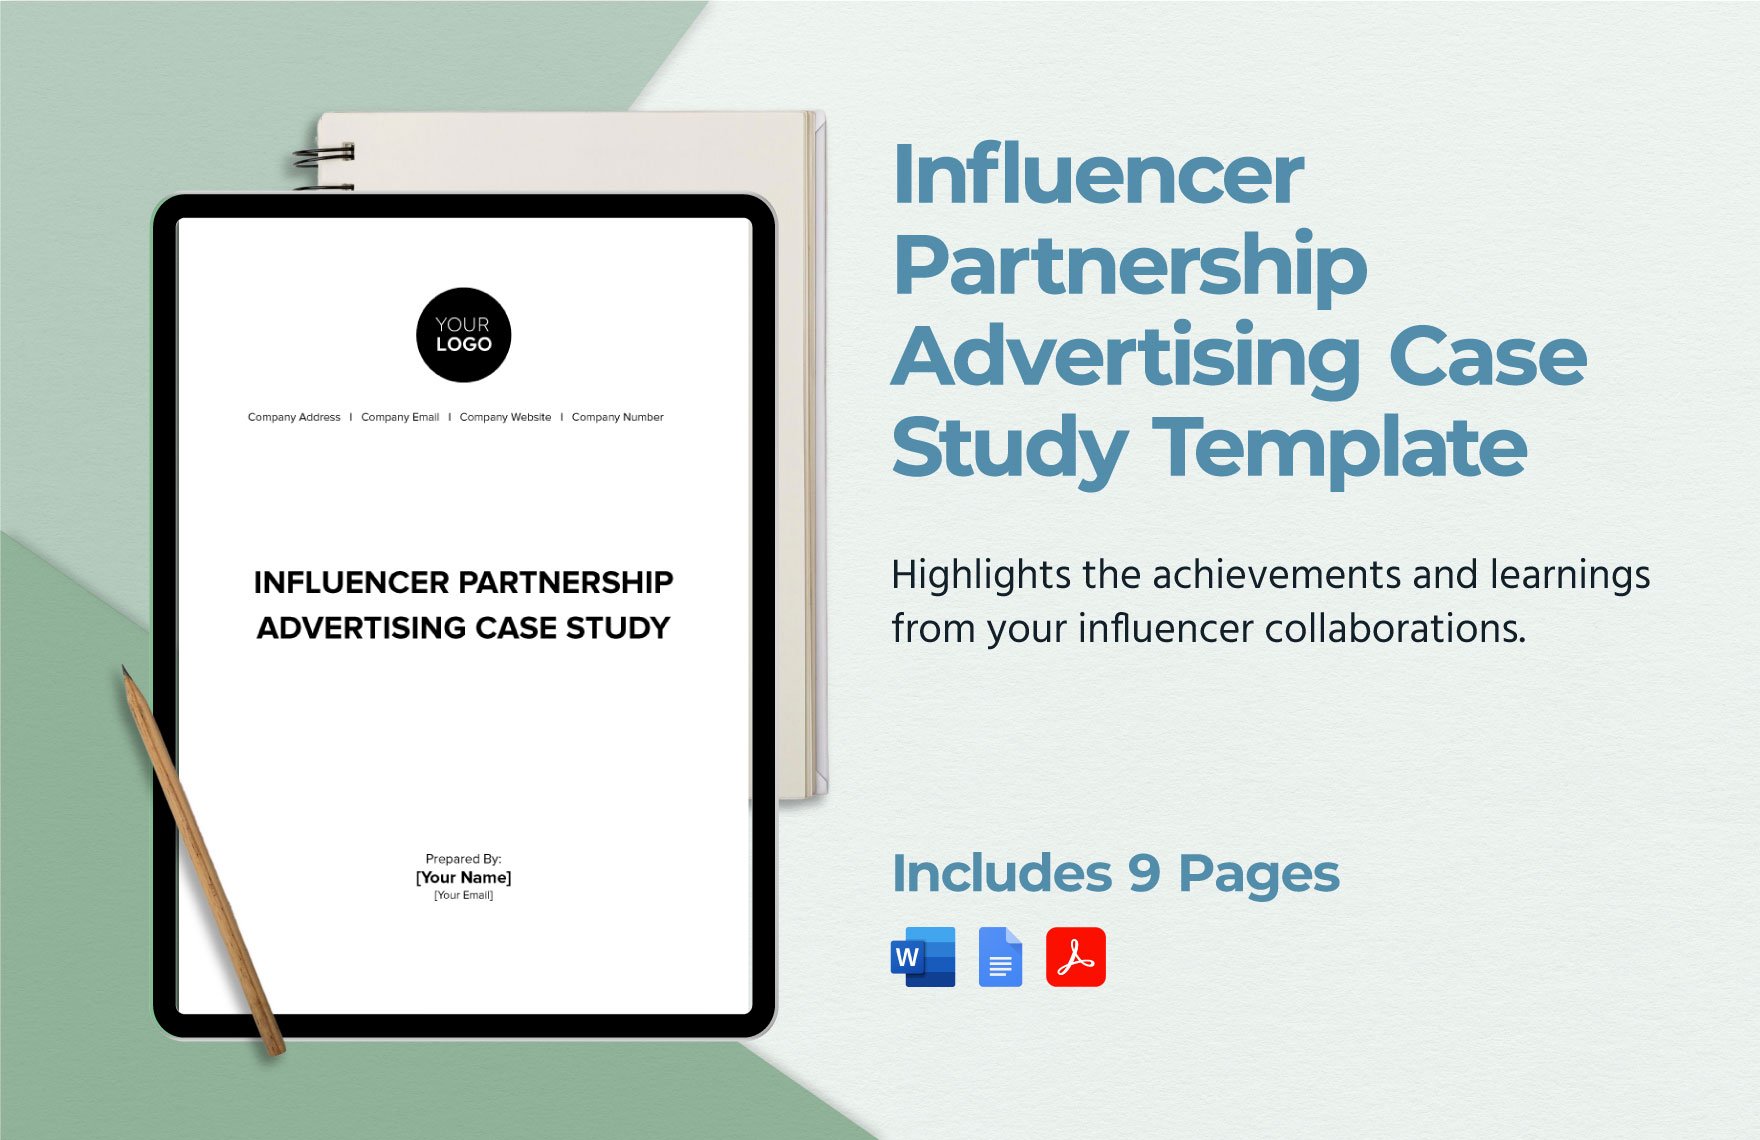 Influencer Partnership Advertising Case Study Template in Word, Google Docs, PDF